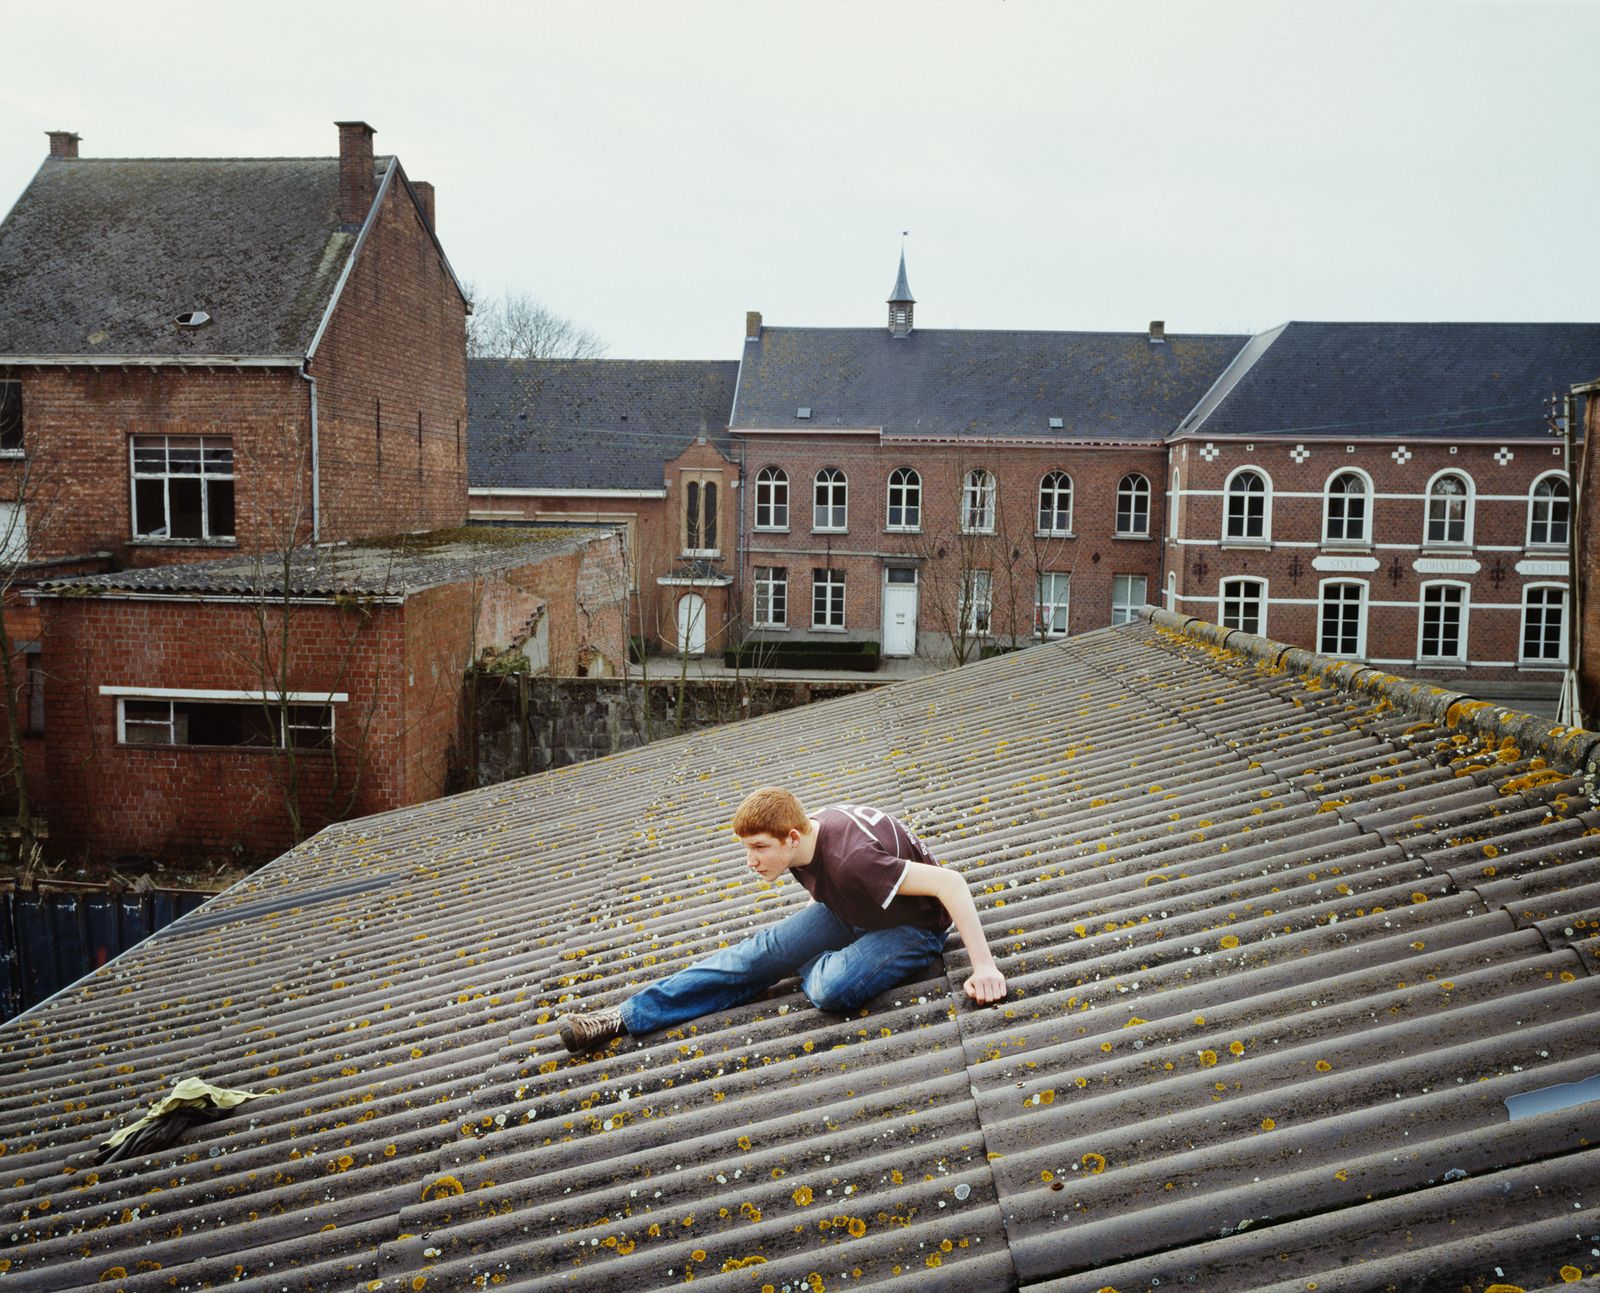 © Isabelle Pateer - Yannick, rooftop view in the center of the endangered village of Doel